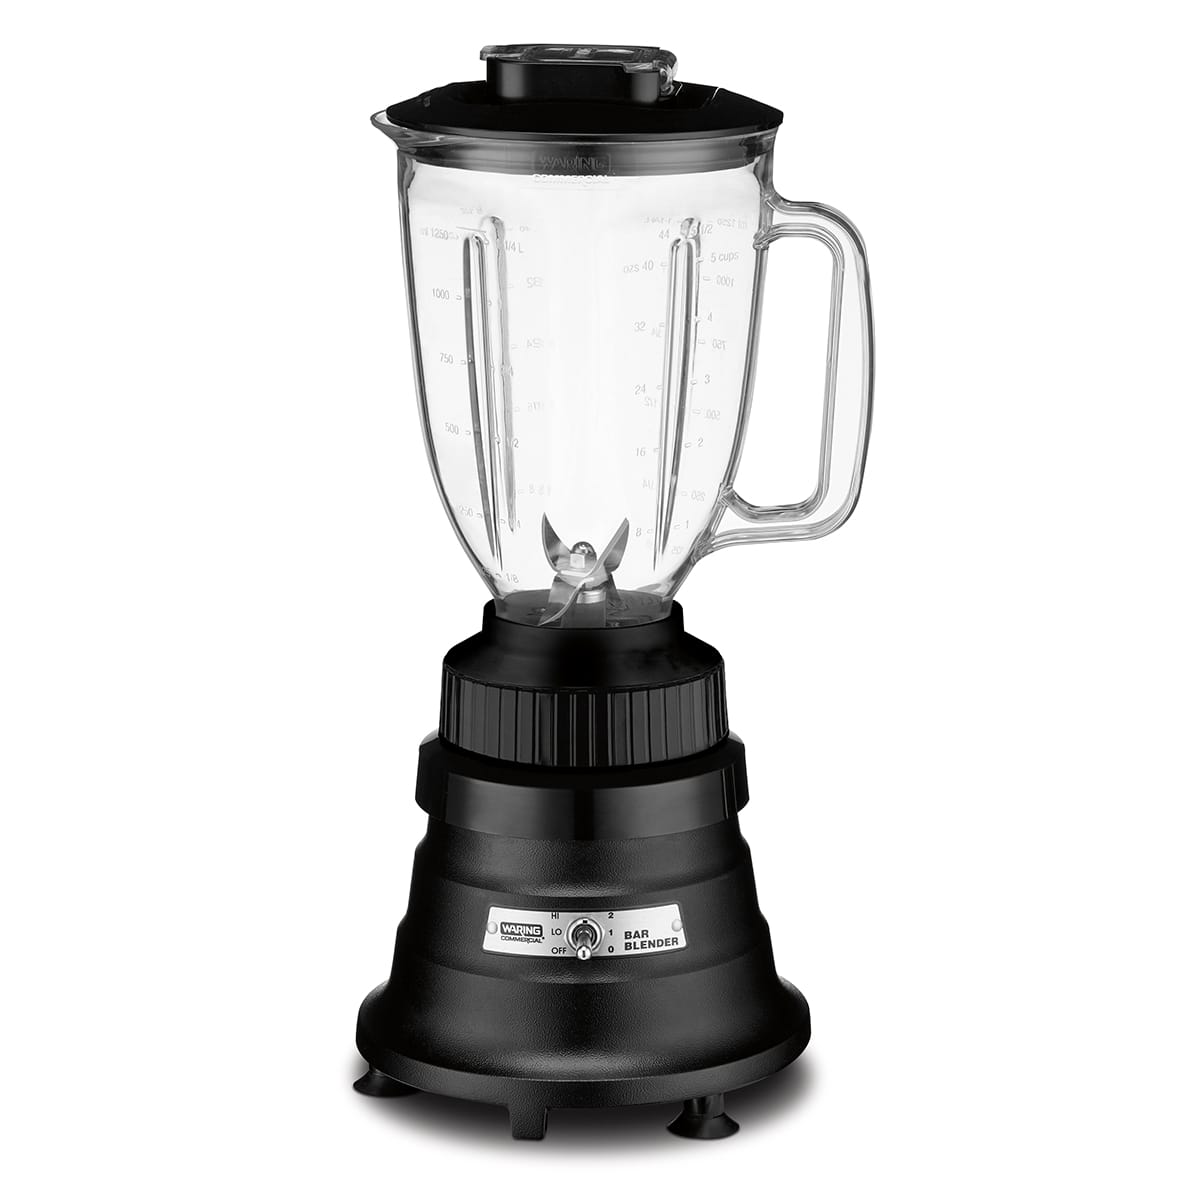 Waring Commercial Heavy-Duty Drink Mixer 16 oz. 3-Speed Silver